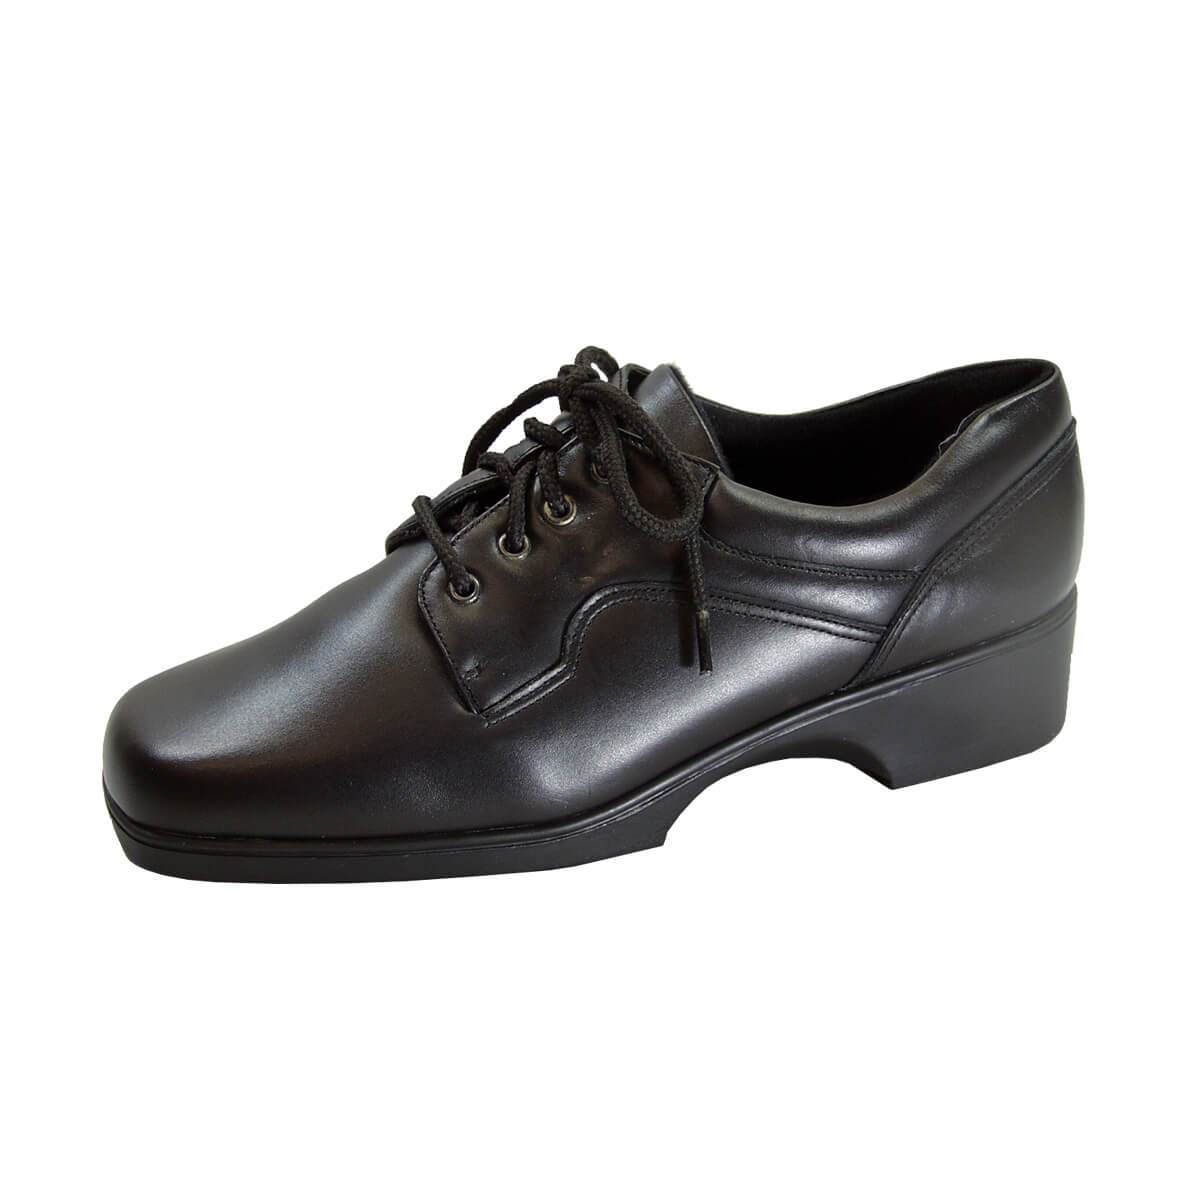 Fazpaz 24 Hour Comfort Cherie Women's Wide Width Leather Lace-Up Oxford Shoes